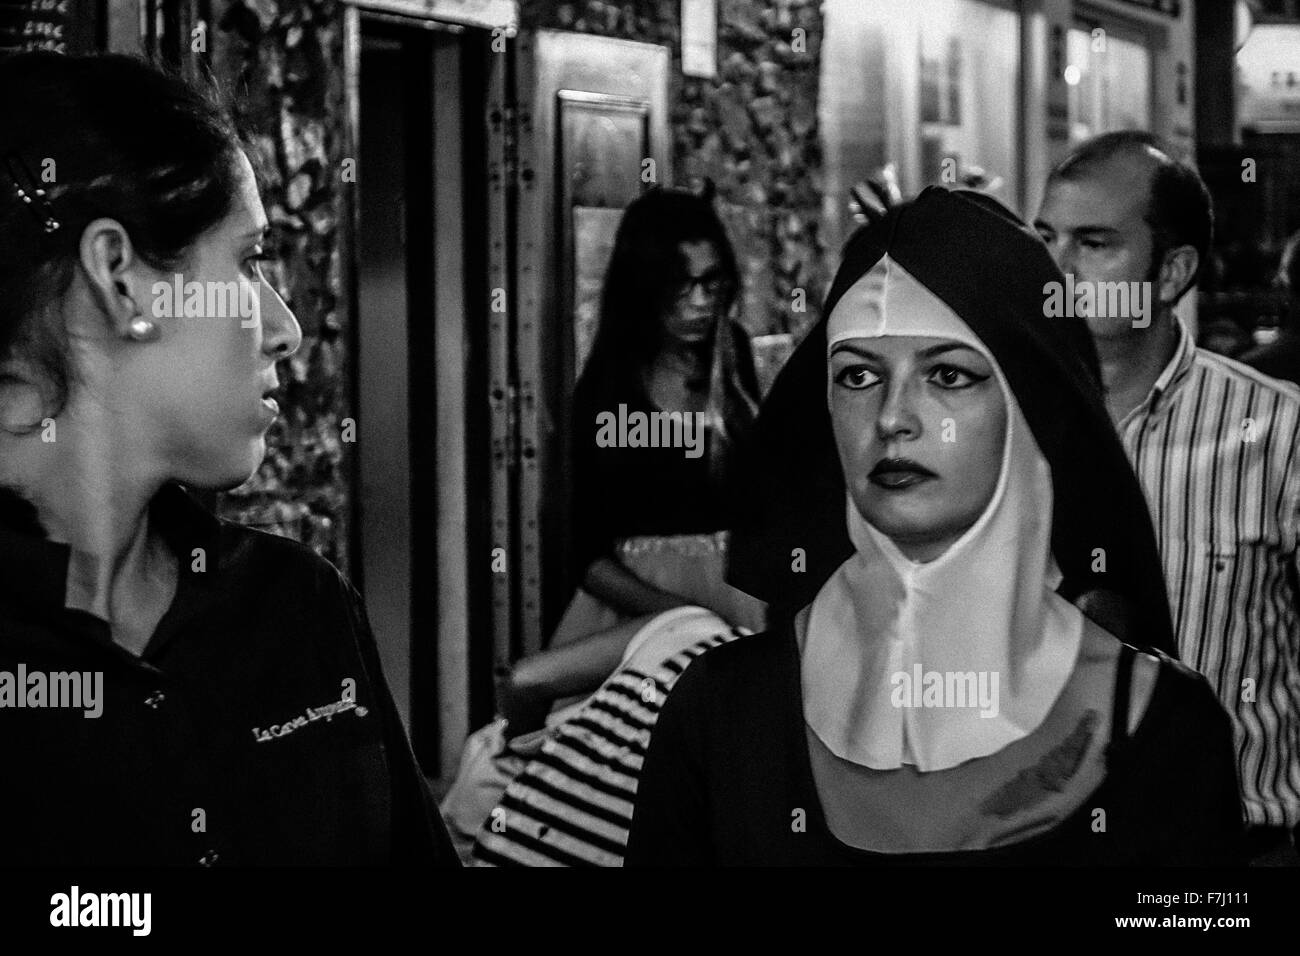 Woman dressed as nun with heavy makeup in Spanish town. Black and white monochrome image in the street Stock Photo